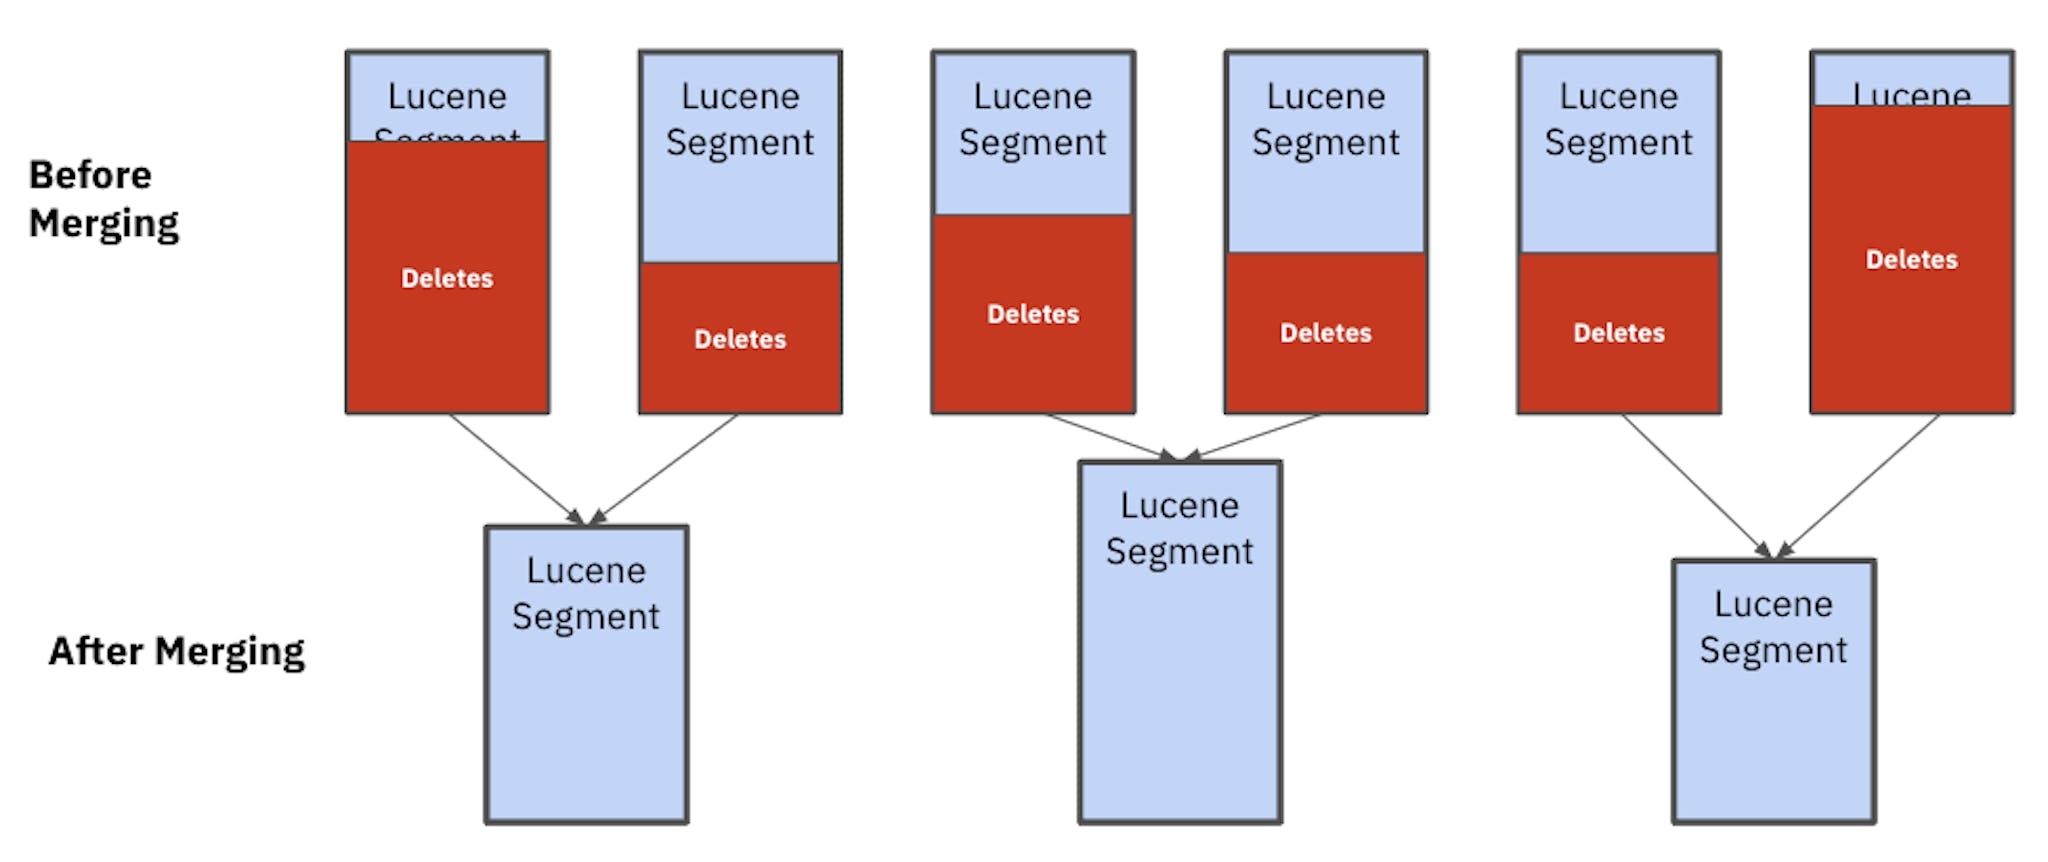 After merging, you can see that the Lucene segments are all different sizes. These uneven segments impact performance and stability